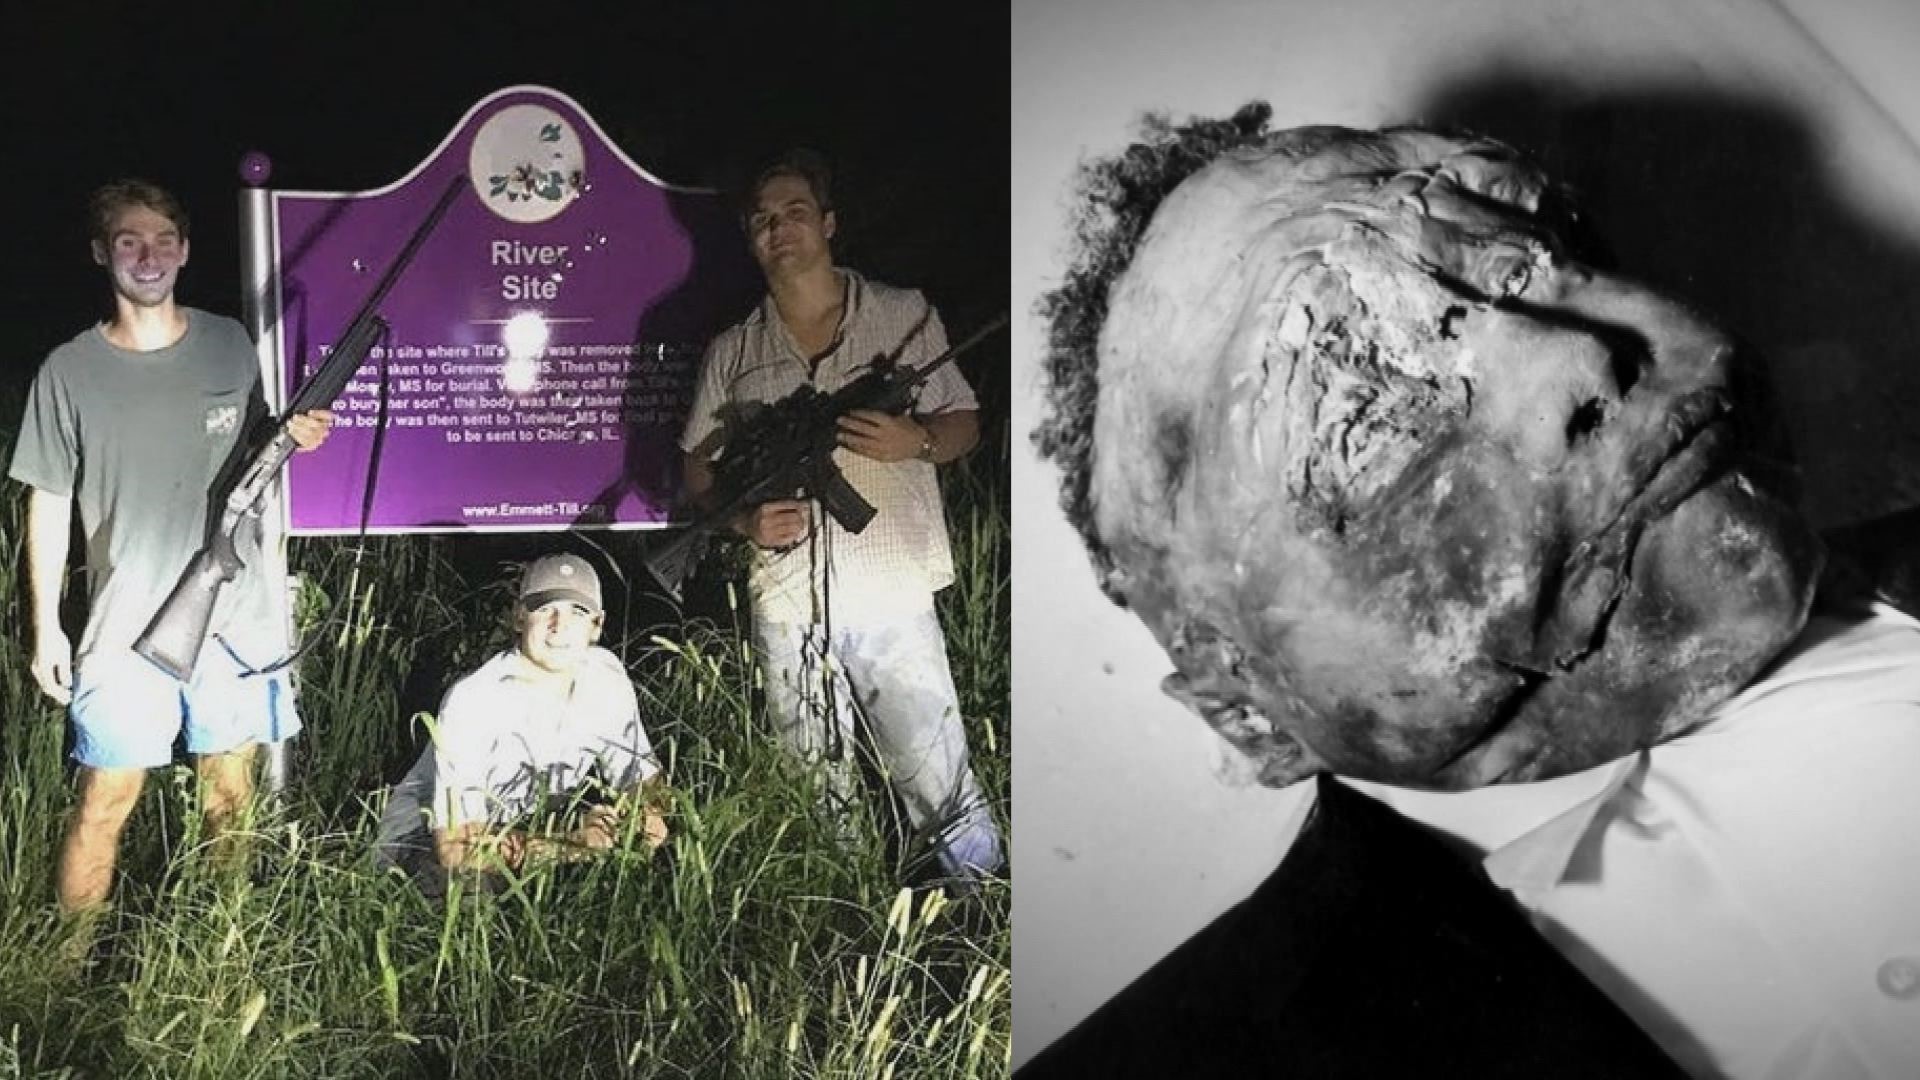 It has been almost 64 years since Emmet Till’s body was pulled from the Tallahatchie River in Mississippi.

Till was a black, 14-year-old boy visiting family in Mississippi from Chicago.

“Emmett whistled to Carolyn Bryant (a white woman) and supposedly he also made some kind of sexual advances,” Duvalier Malone, political columnist for the Clarion Ledger newspaper said.

Till was kidnapped, tortured, and killed.

If he were still living, Till would have turned 78-years-old on July 25th.